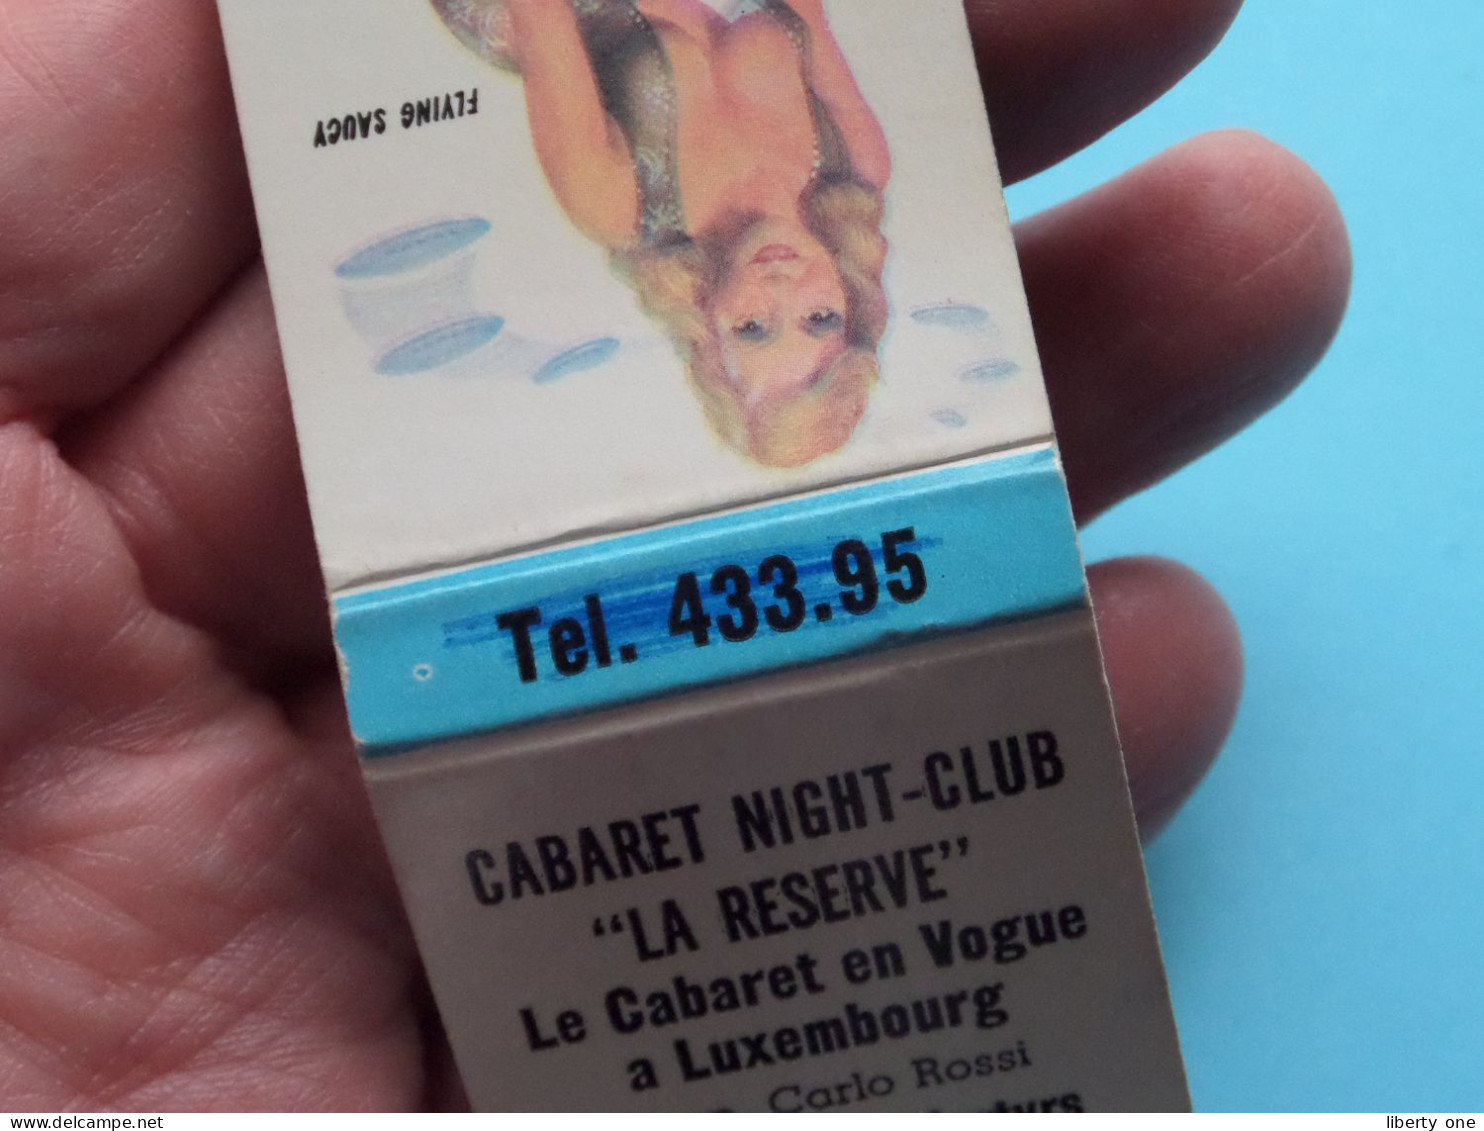 CABARET NIGHT-CLUB " LA RESERVE " à LUXEMBOURG > Flying Saucy ( Prop. Carlo Rossi ) Regal Batch C° USA ! - Advertising Items